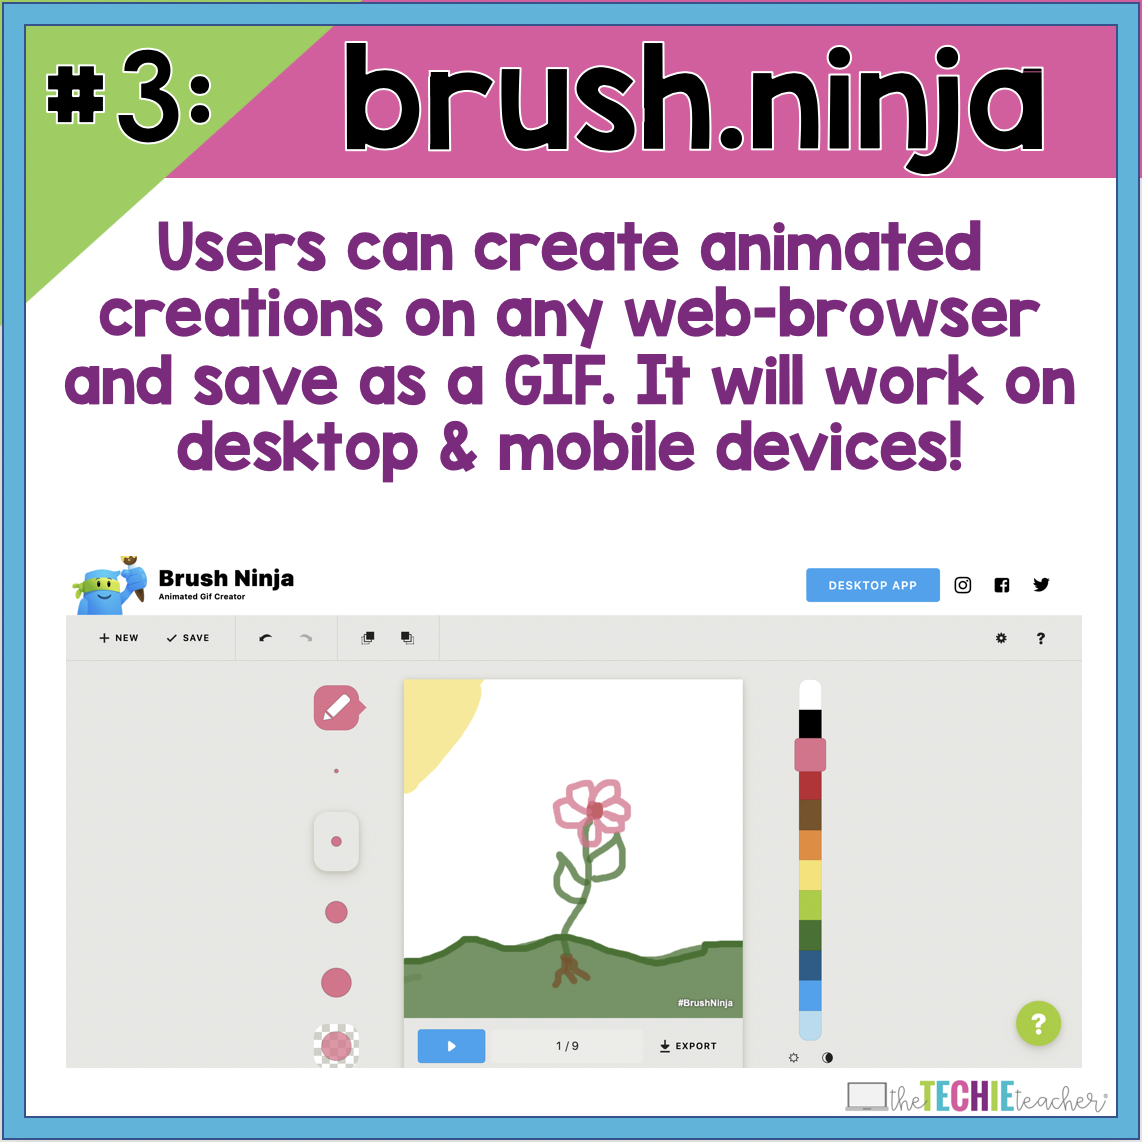 My Favorite 10 Apps & Websites for Creating Animated GIFs